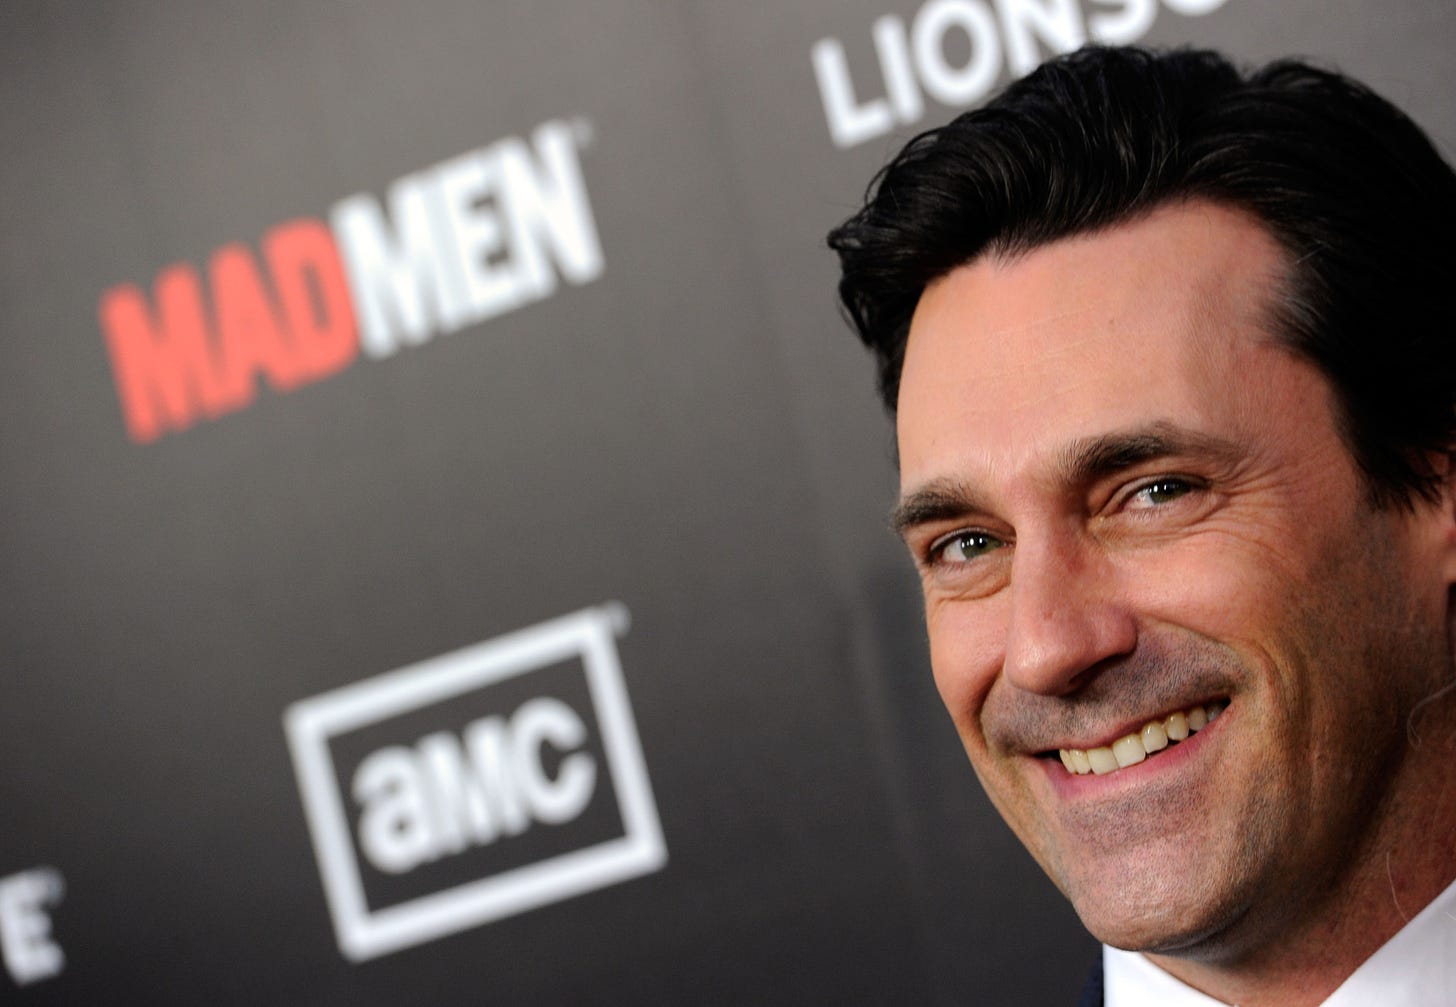 Actor Jon Hamm arrives at the Premiere of AMC's "Mad Men" Season 5 at ArcLight Cinemas on March 14, 2012 in Hollywood, California. (Photo by Frazer Harrison/Getty Images)